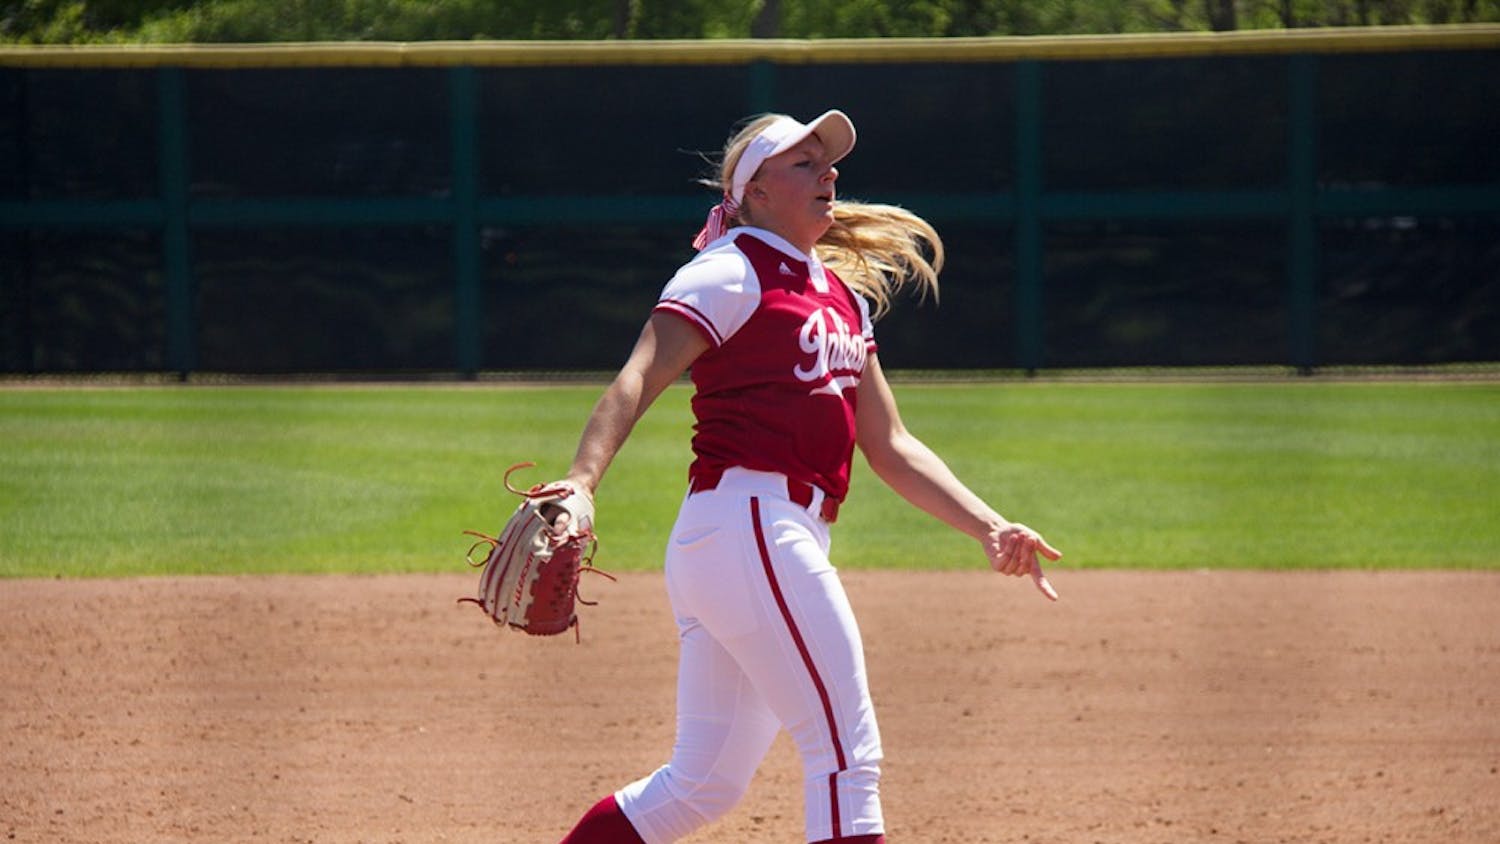 Then-freshman pitcher Josie Wood throws a pitch last season against Ohio State University at Andy Mohr Field.